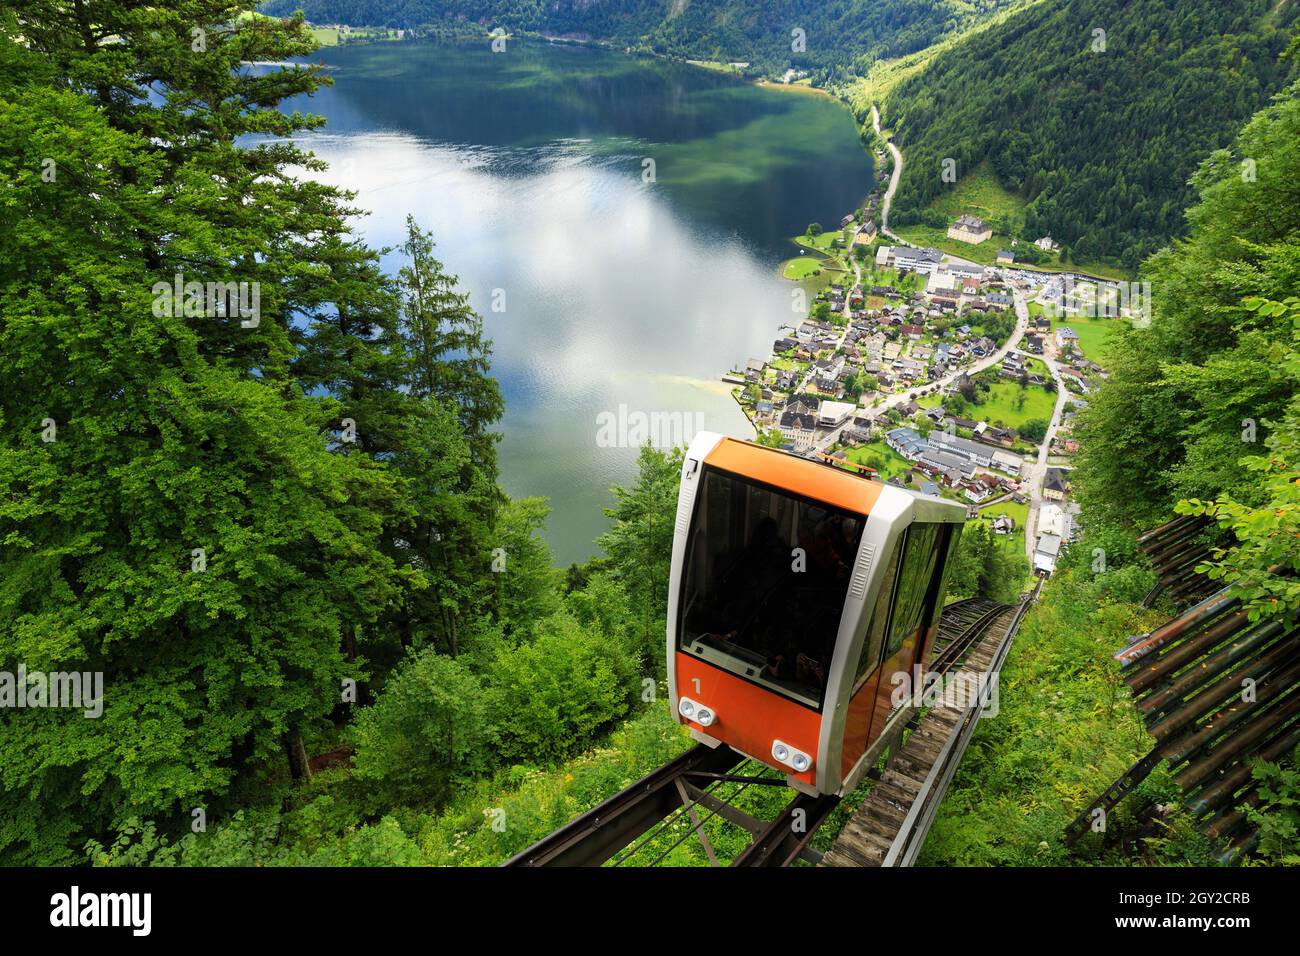 A cable car taking visitors up to Salzwelten, Hallstatt, Austria; one of the oldest salt mines in the world. Stock Photo